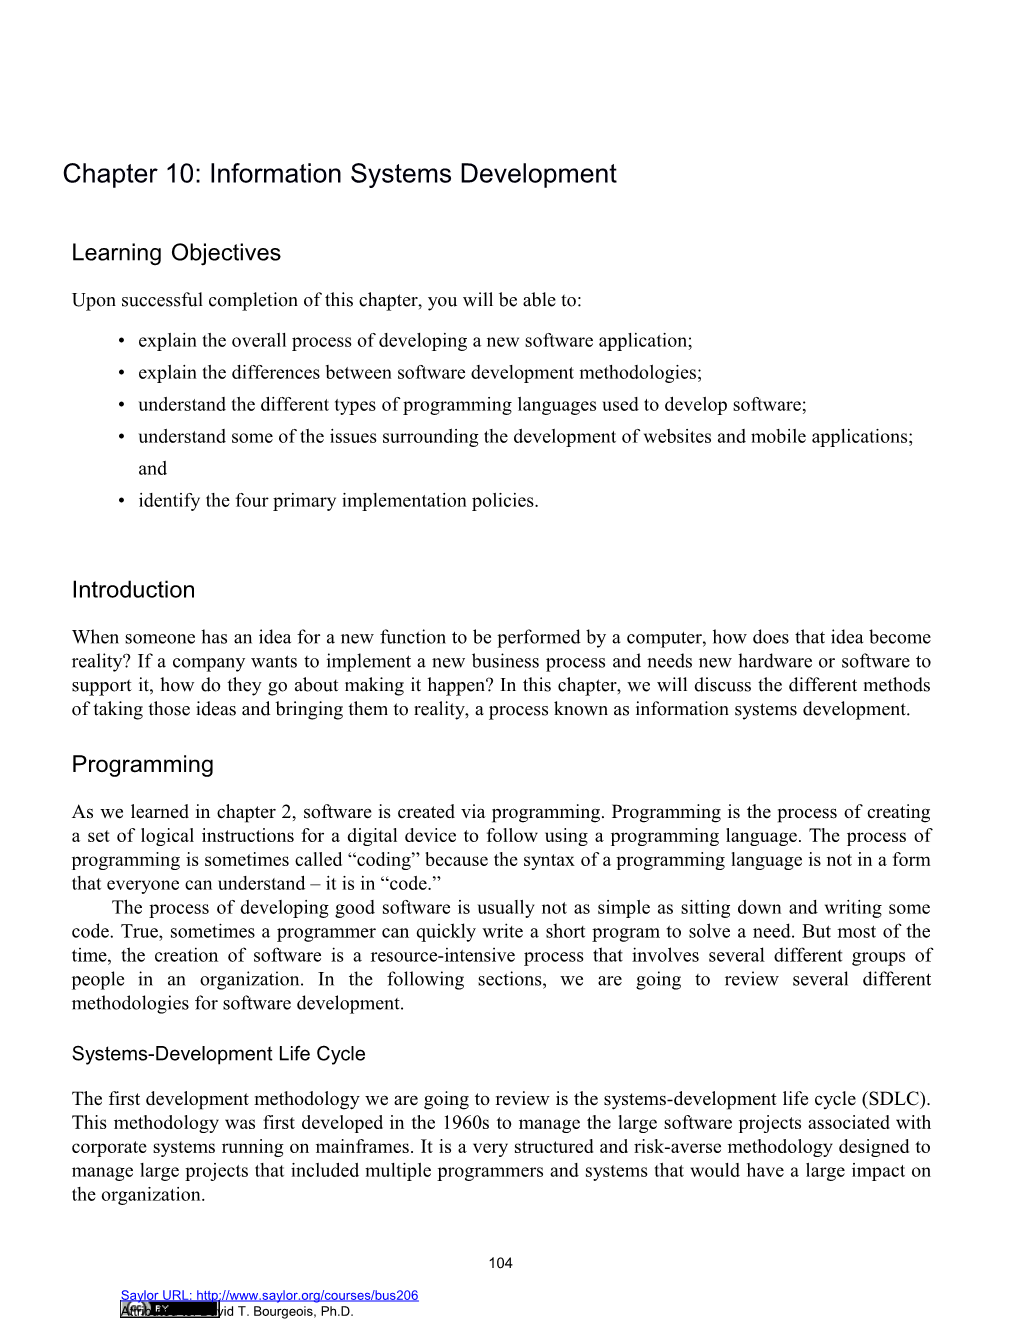 Information Systems for Business and Beyond s1